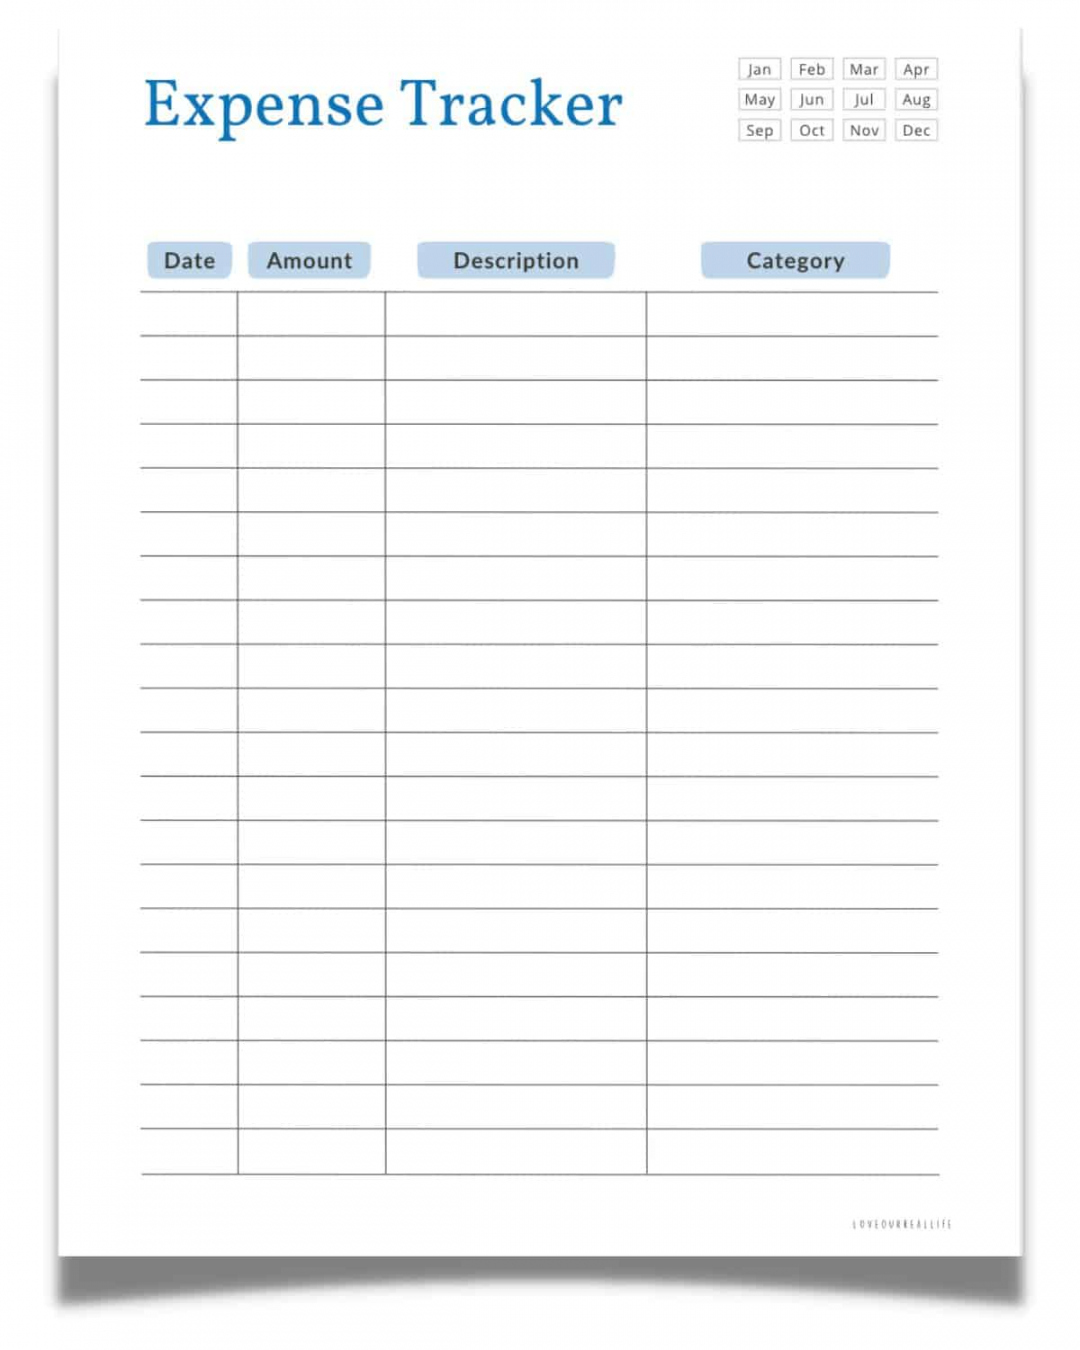 FREE Printable Expense Tracker - Monthly Budget Trackers ⋆ Love  - FREE Printables - Expense Tracker Printable Free